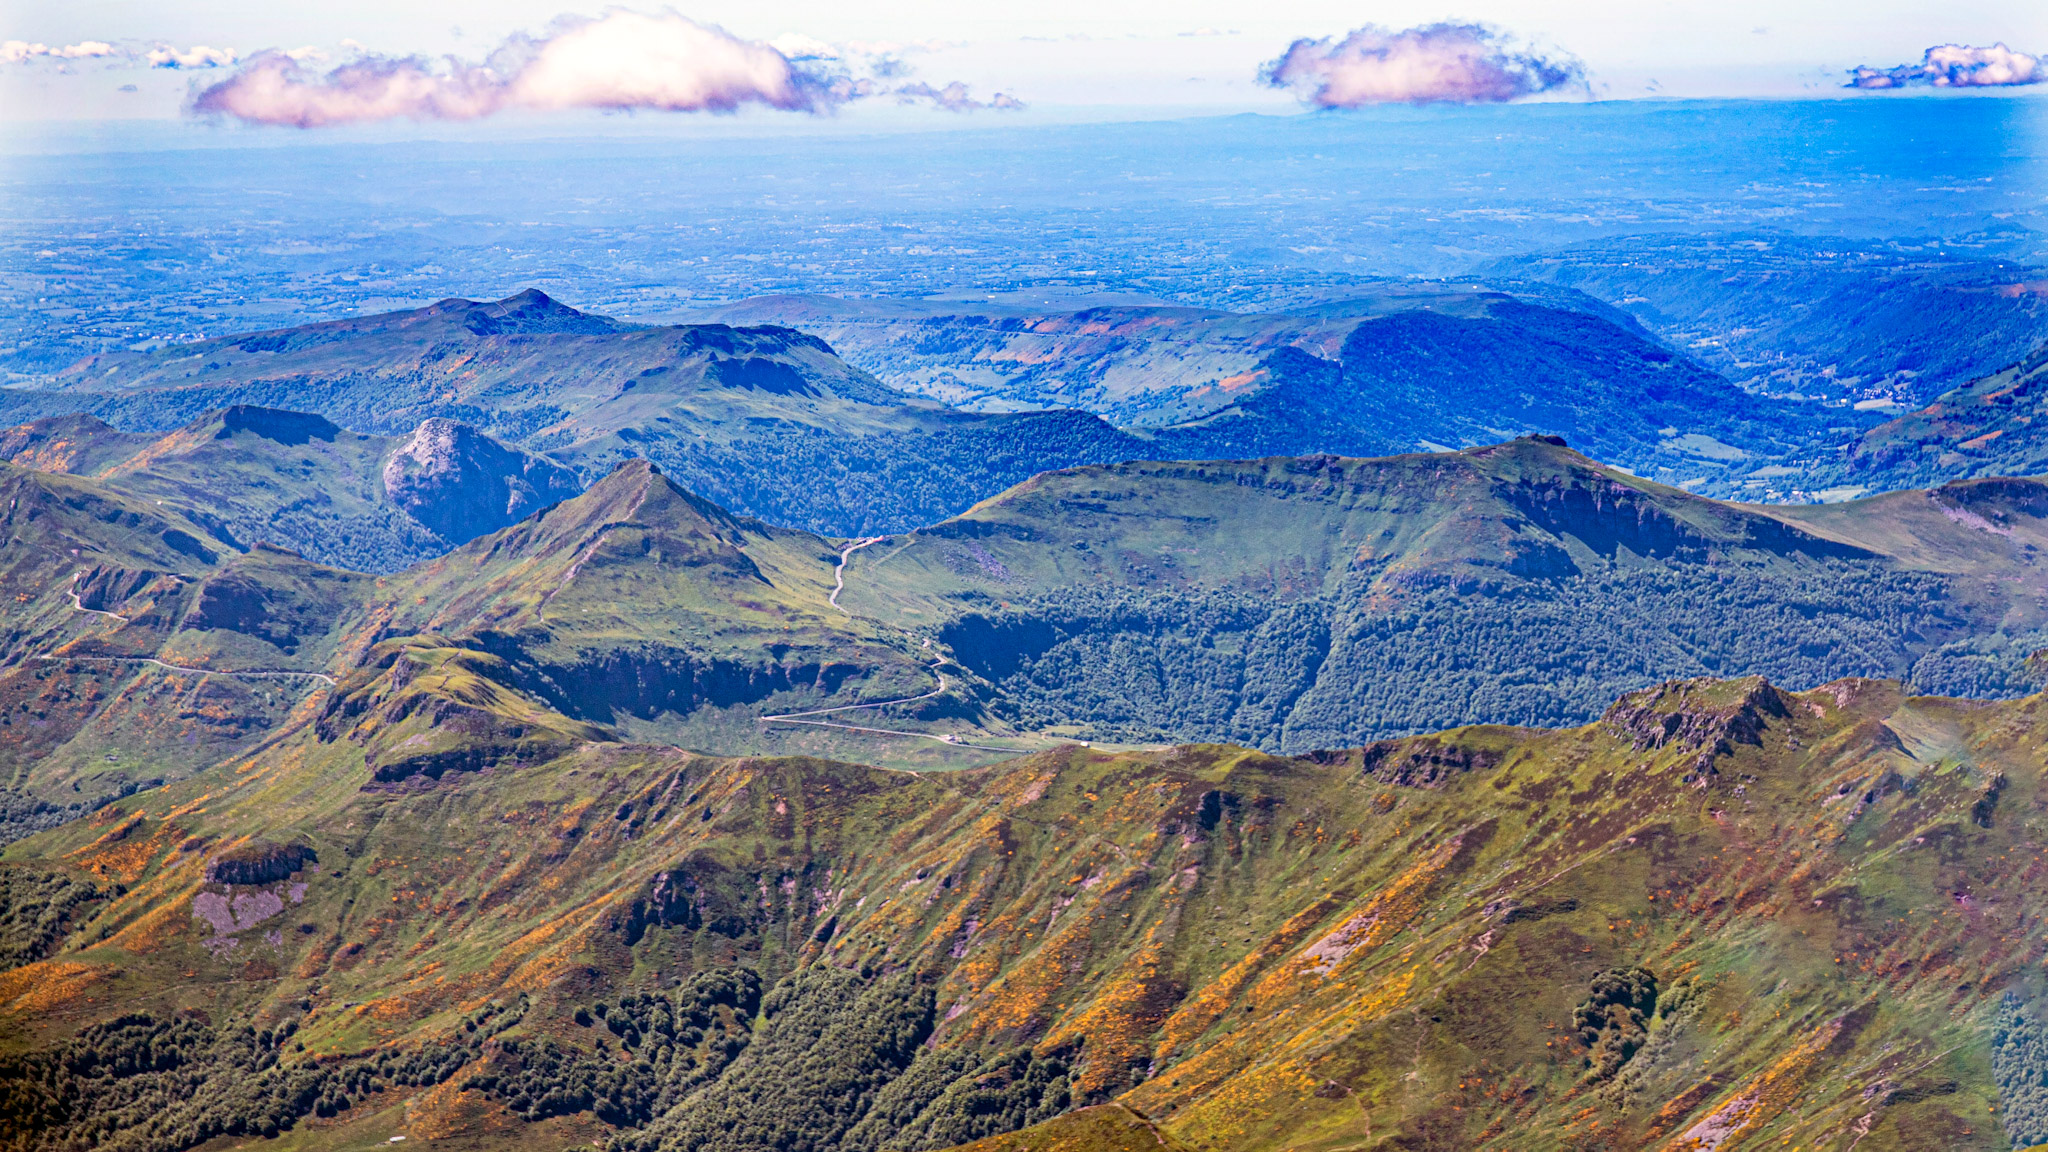 The Cantal Volcanoes